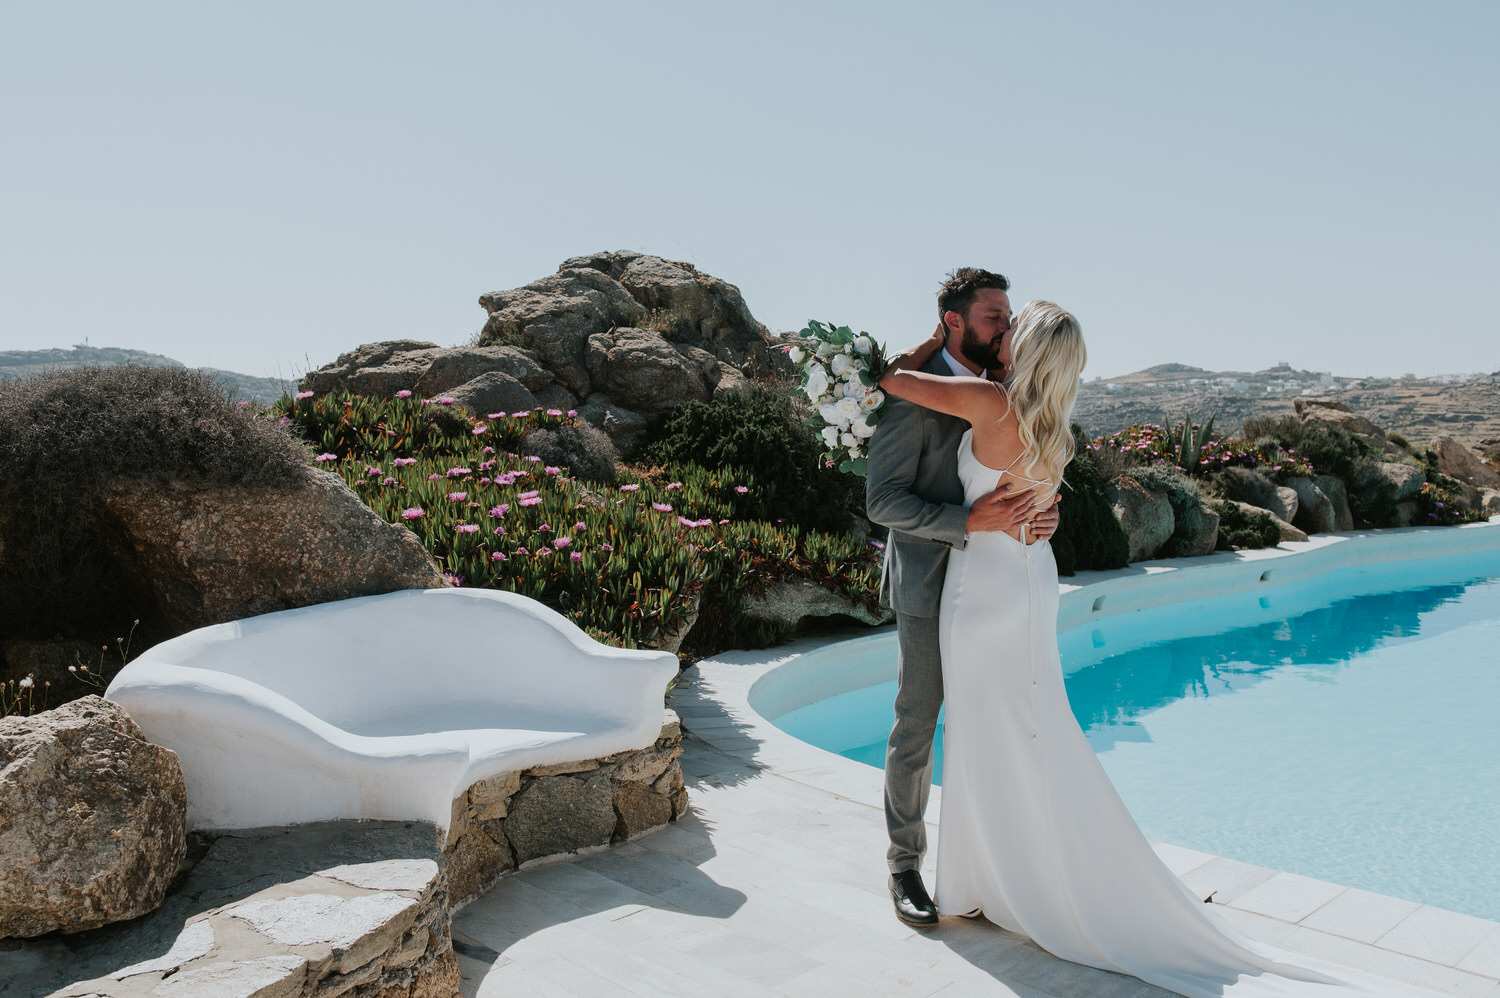 Mykonos wedding photographer: bride and groom embraced in a kiss next to the pool and the rocks in the background.